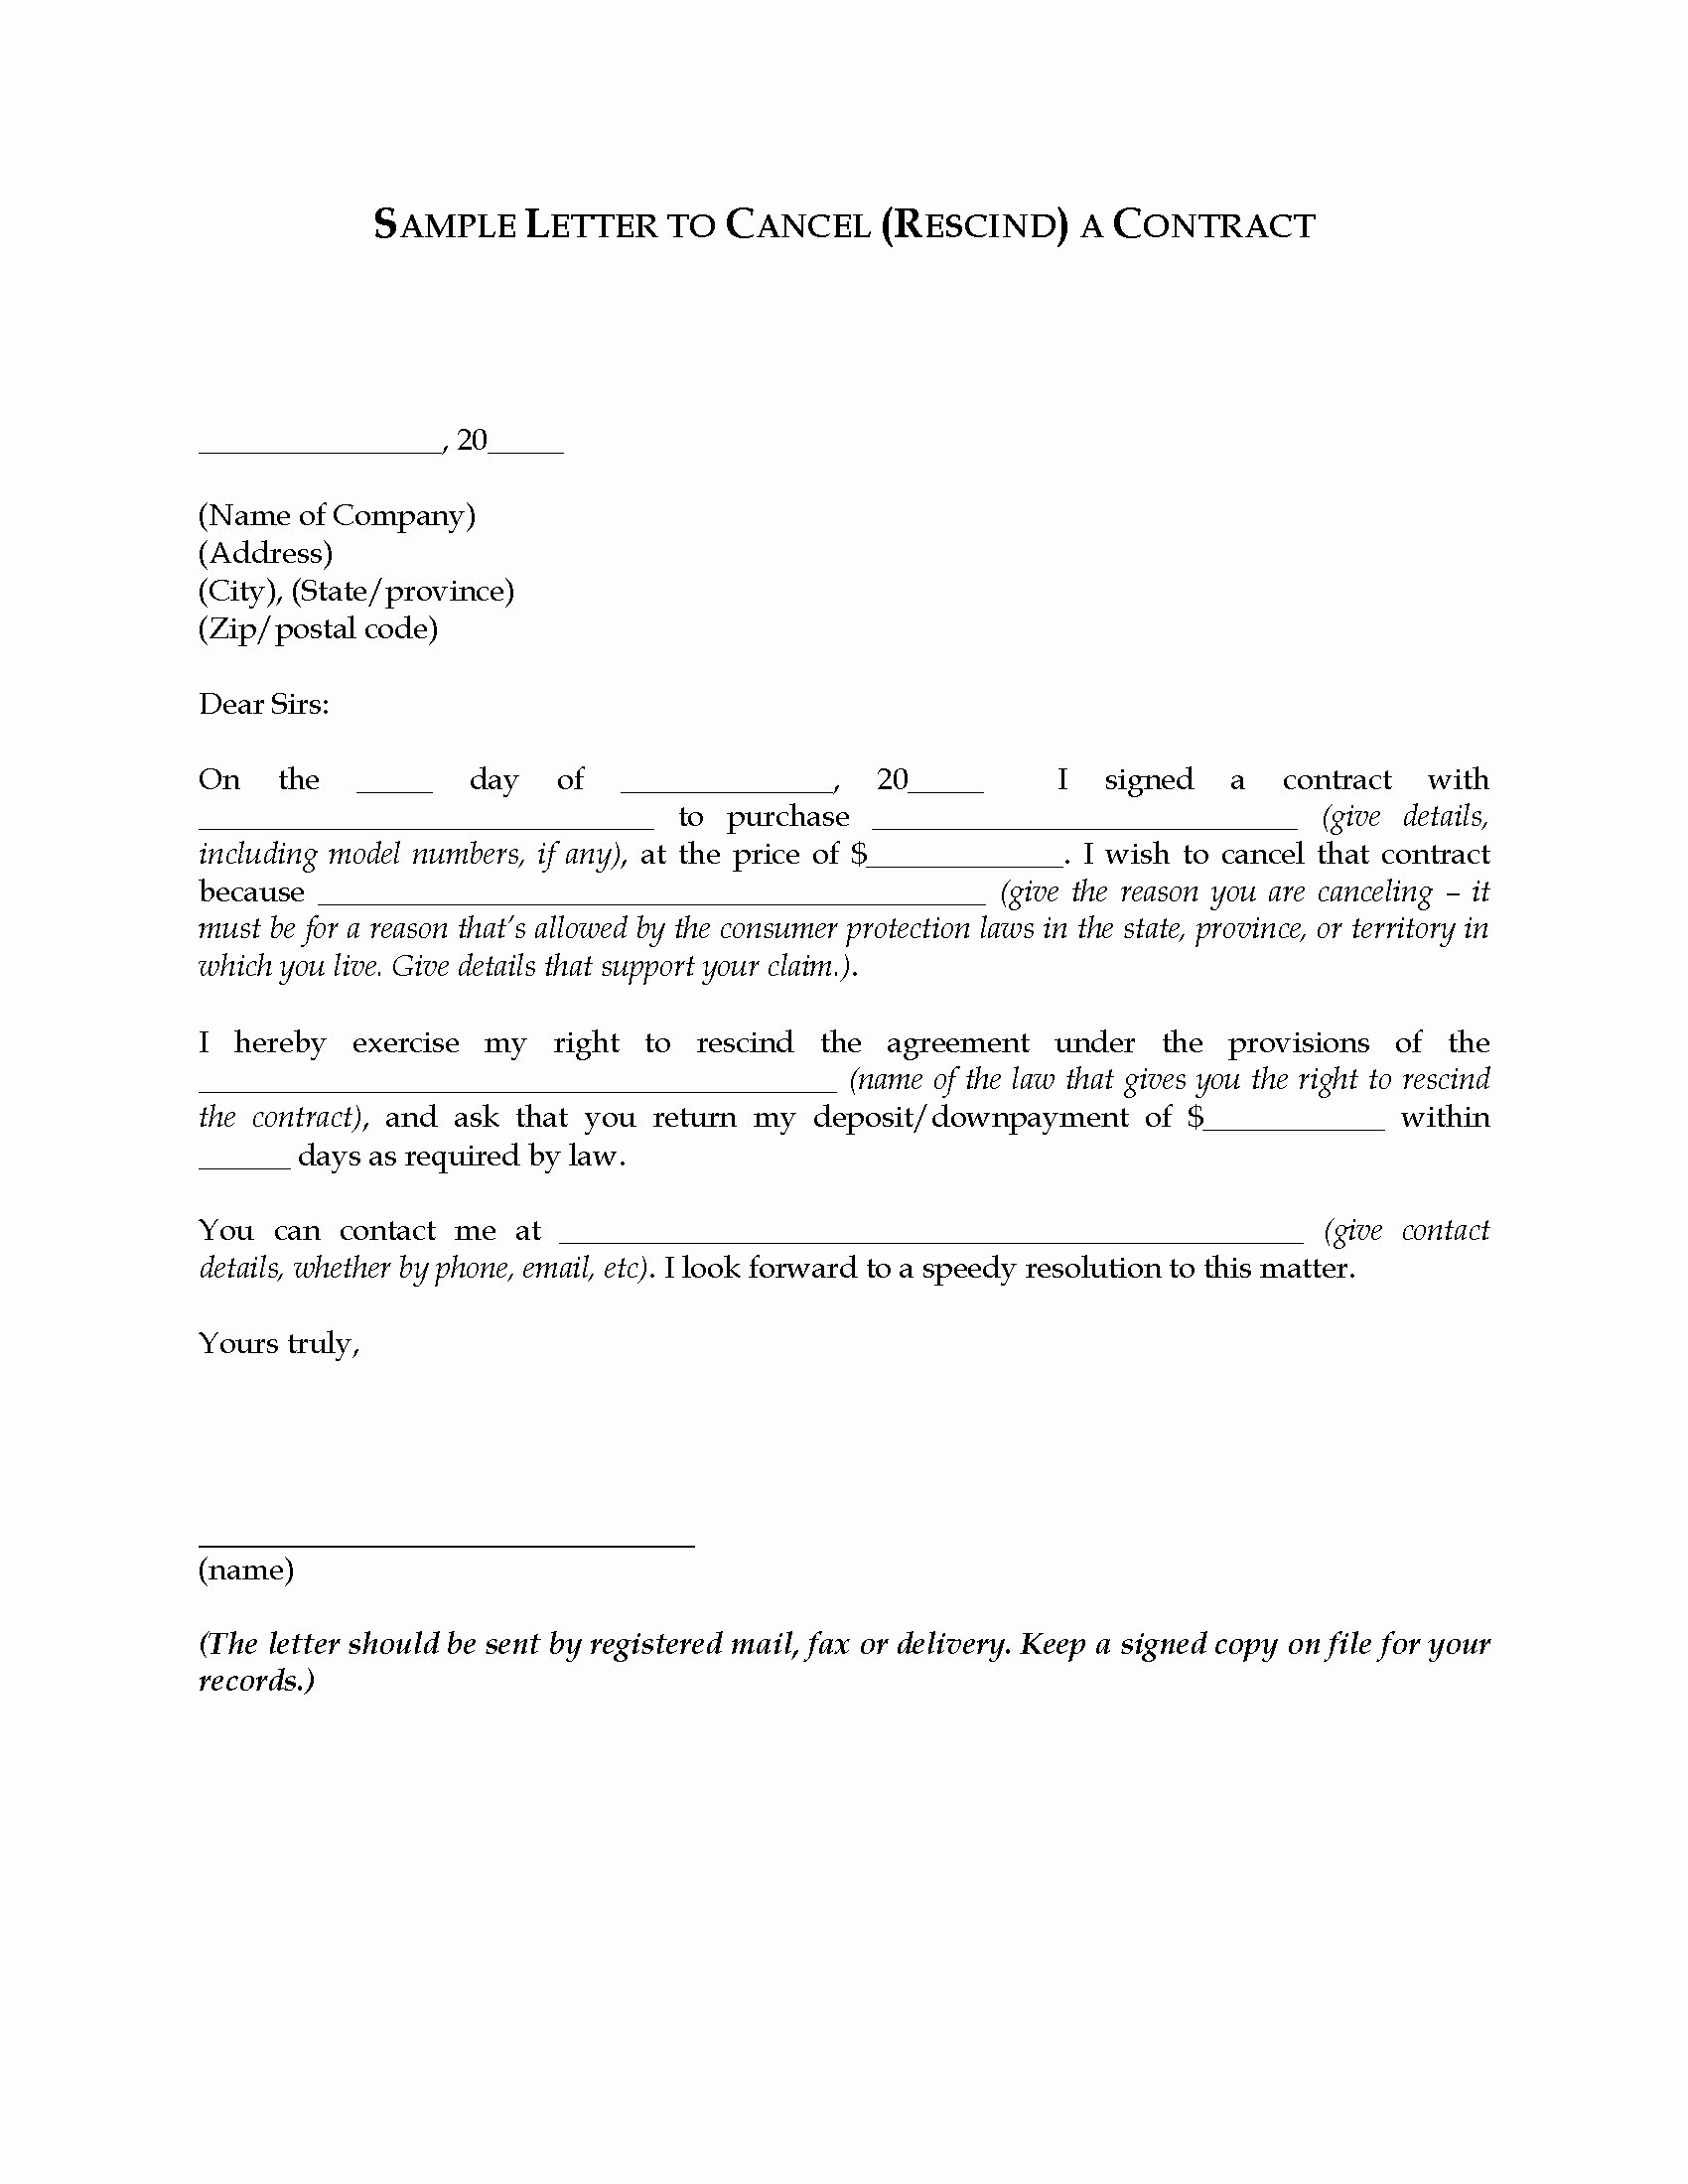 Timeshare Cancellation Letter Sample Awesome Letter to Rescind Cancel A Contract